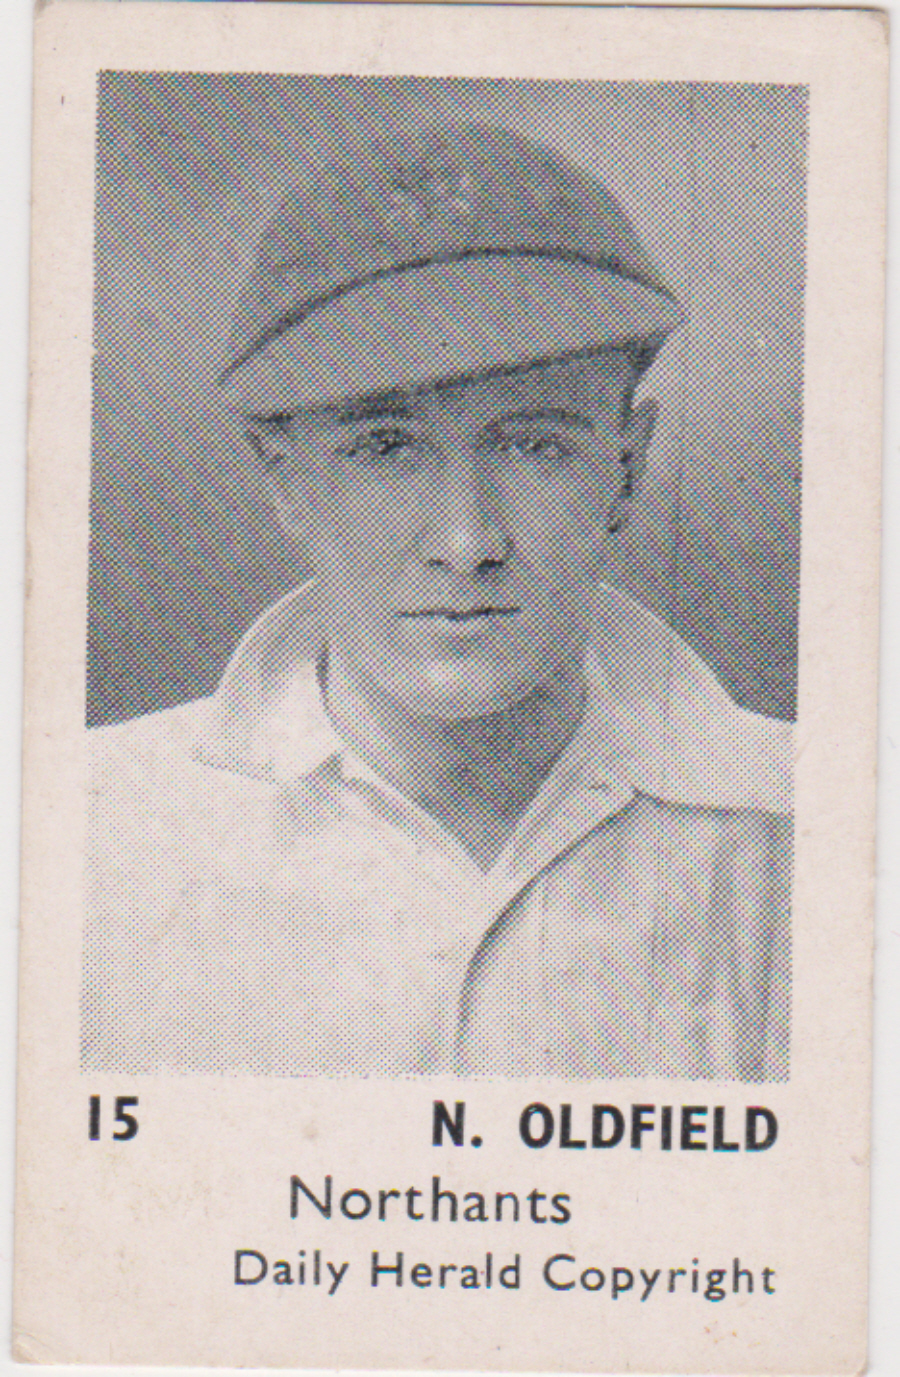 Daily Herald Cricketers No15 N Oldfield